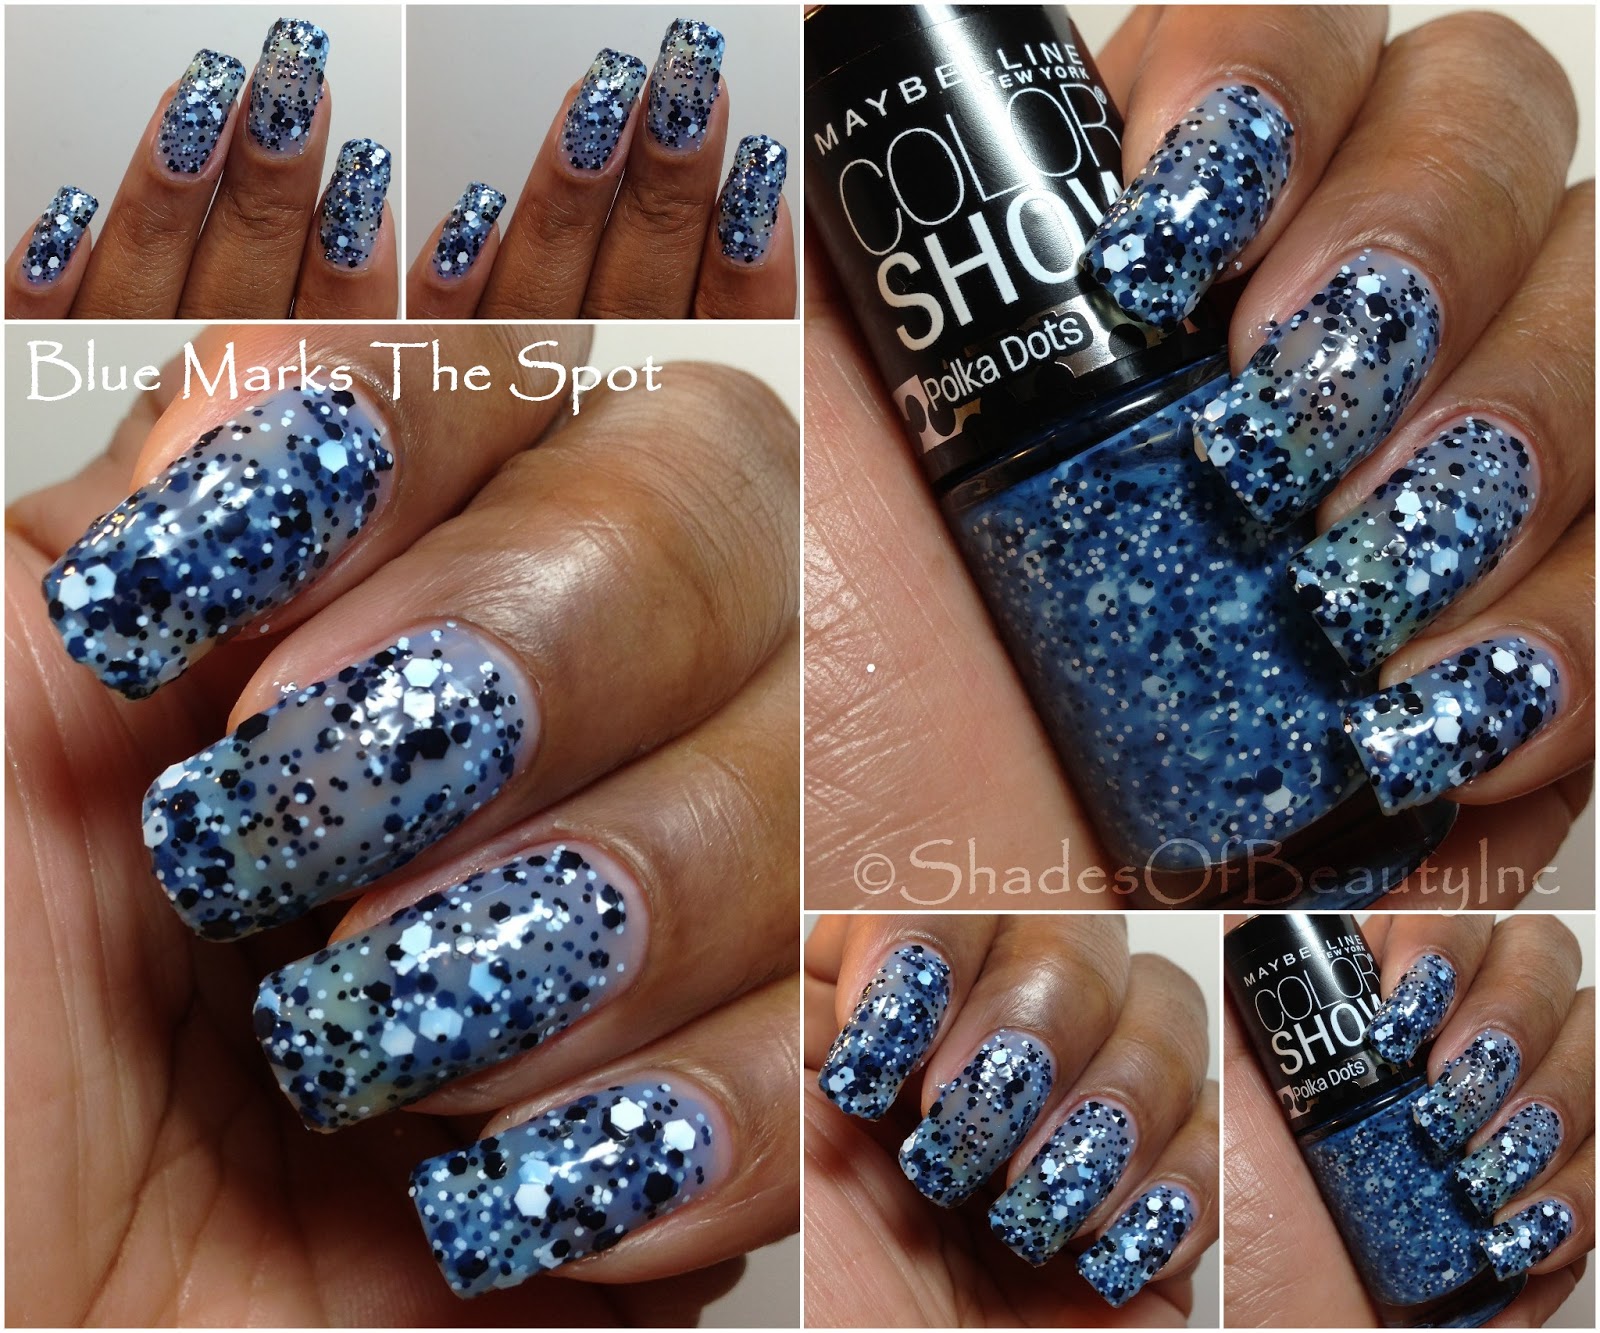 Maybelline SuperStay Gel Nail Colour: Does It Last 7 Days?